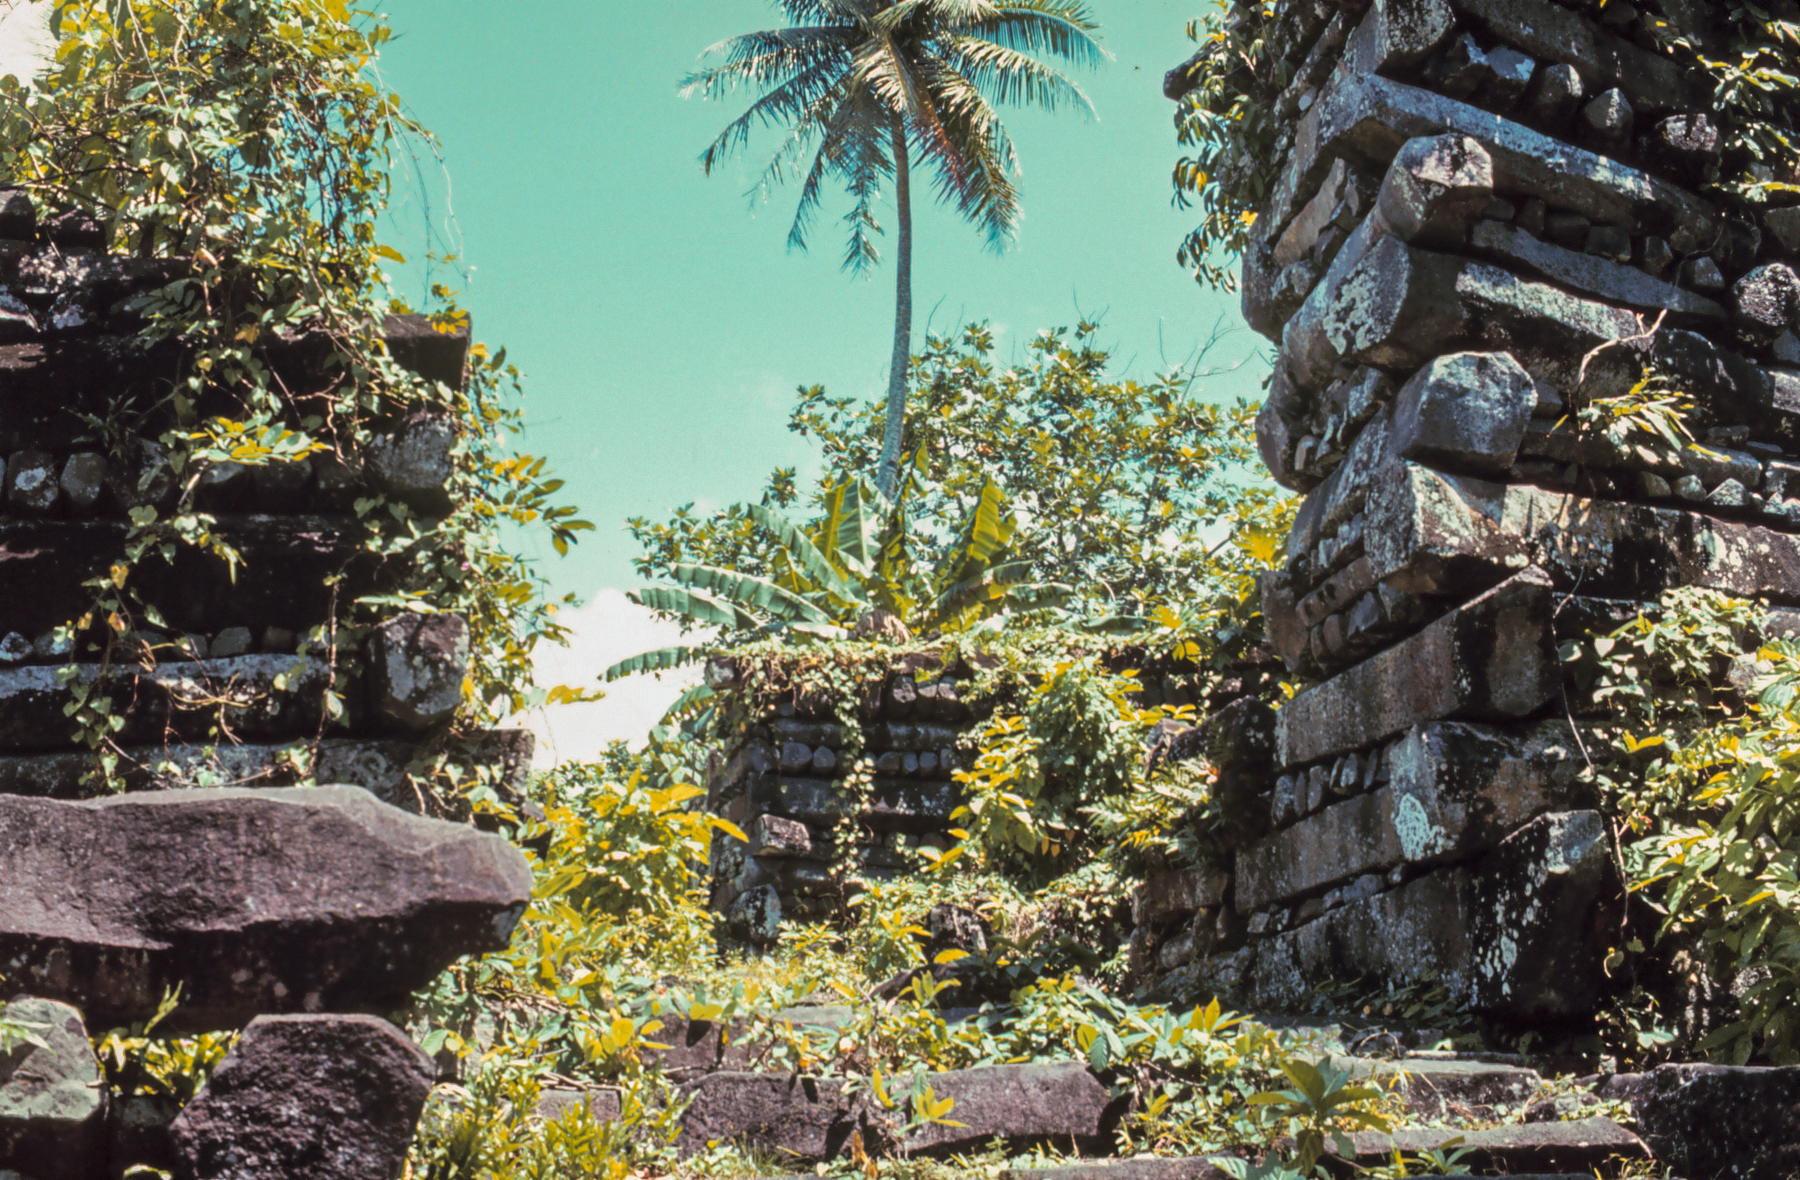 The cyclopean ruins of Nan Madol in Pohnpei, in the Caroline Islands